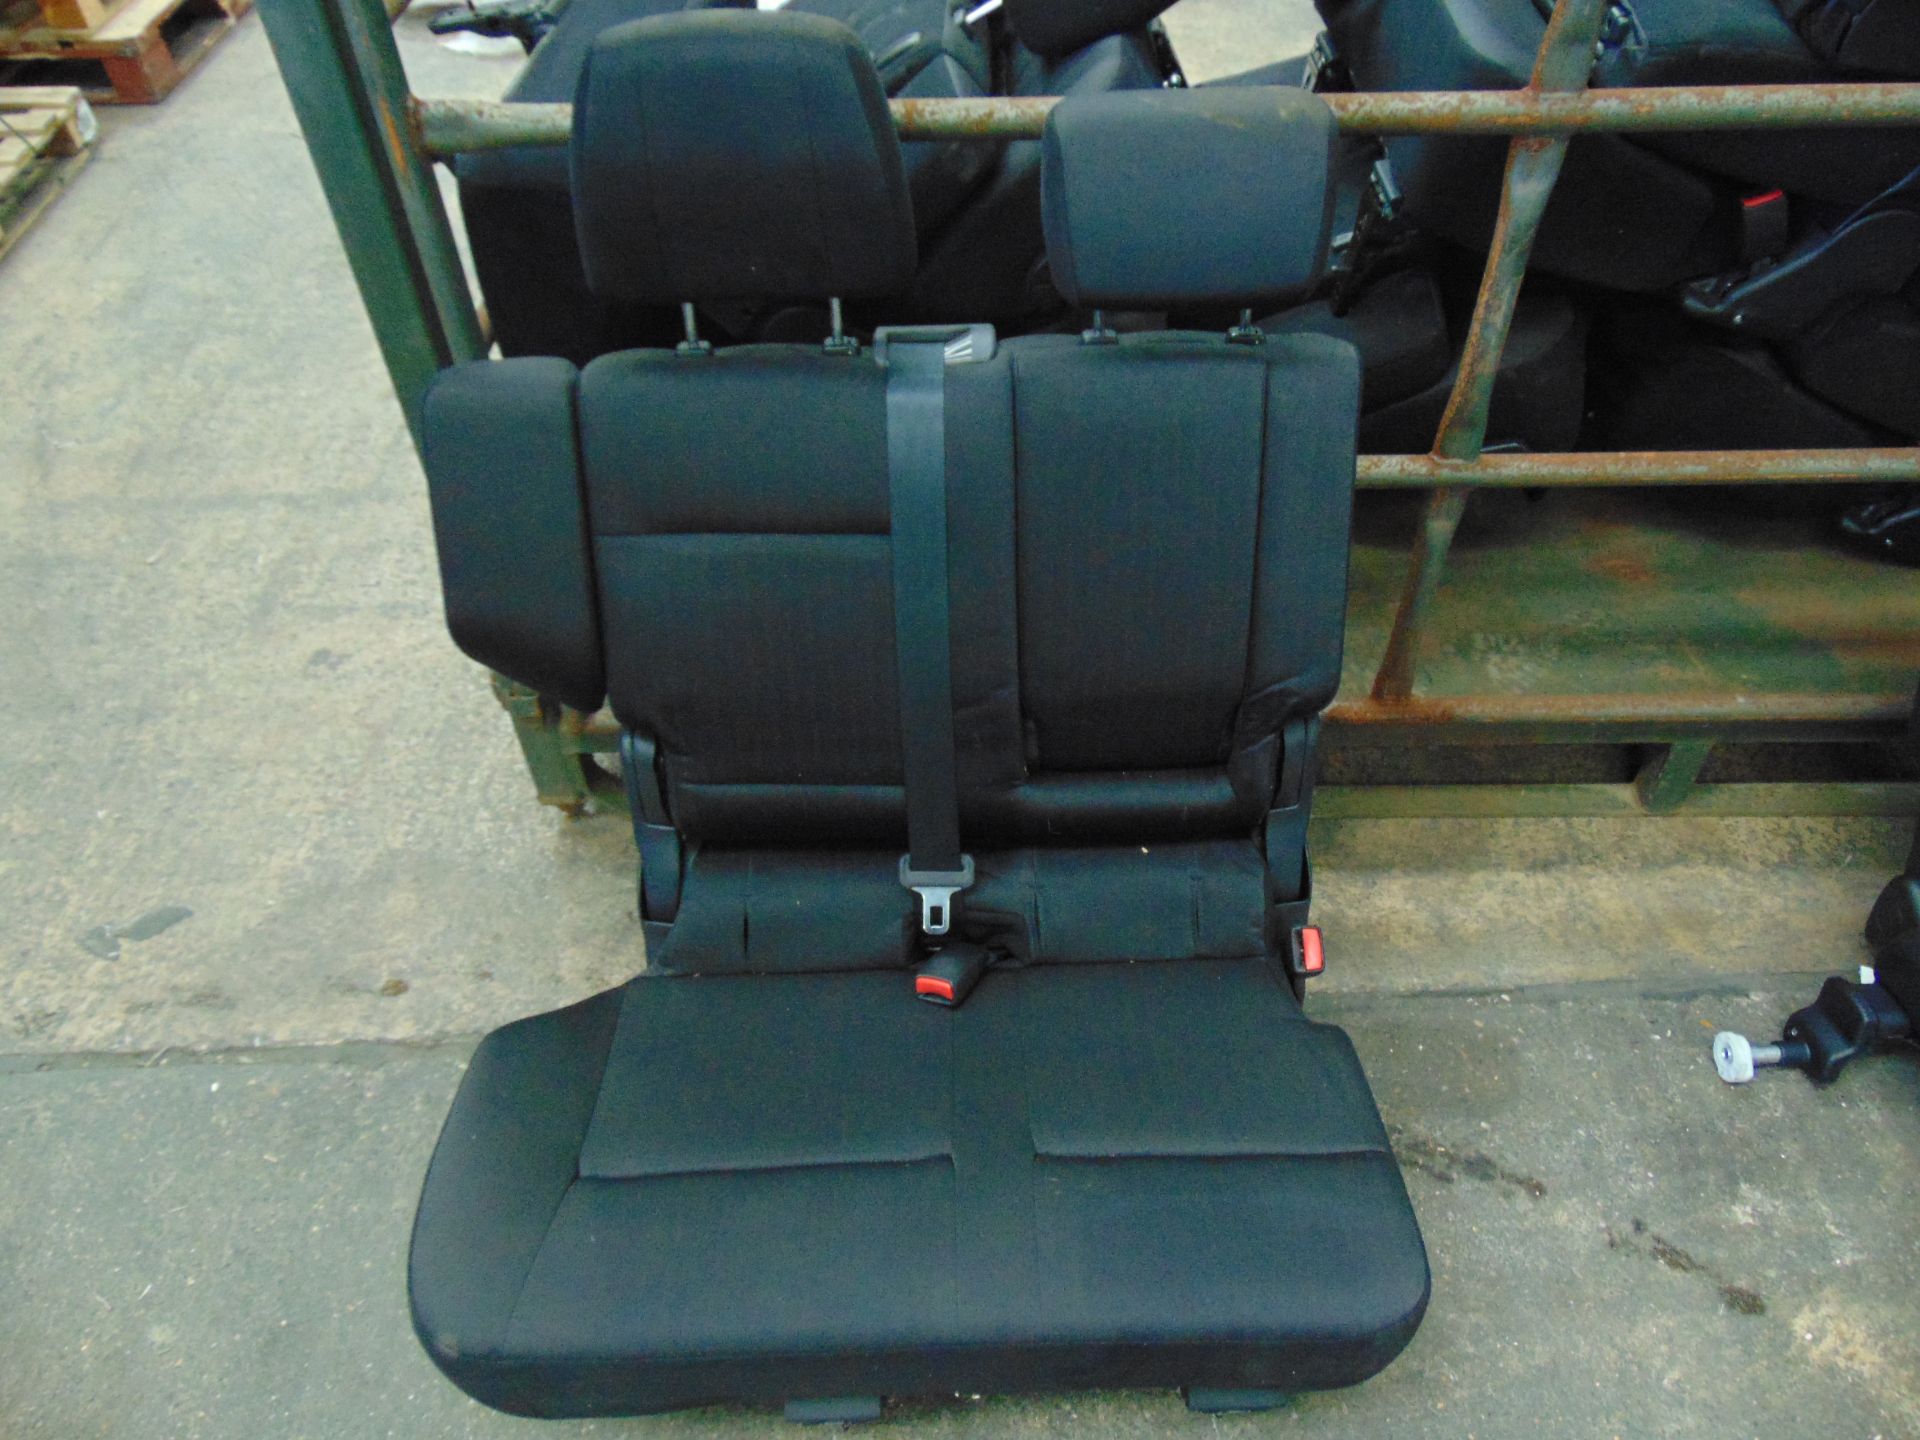 Mixed Stillage of Mitsubishi Bench Seats and Head Rests - Image 3 of 6